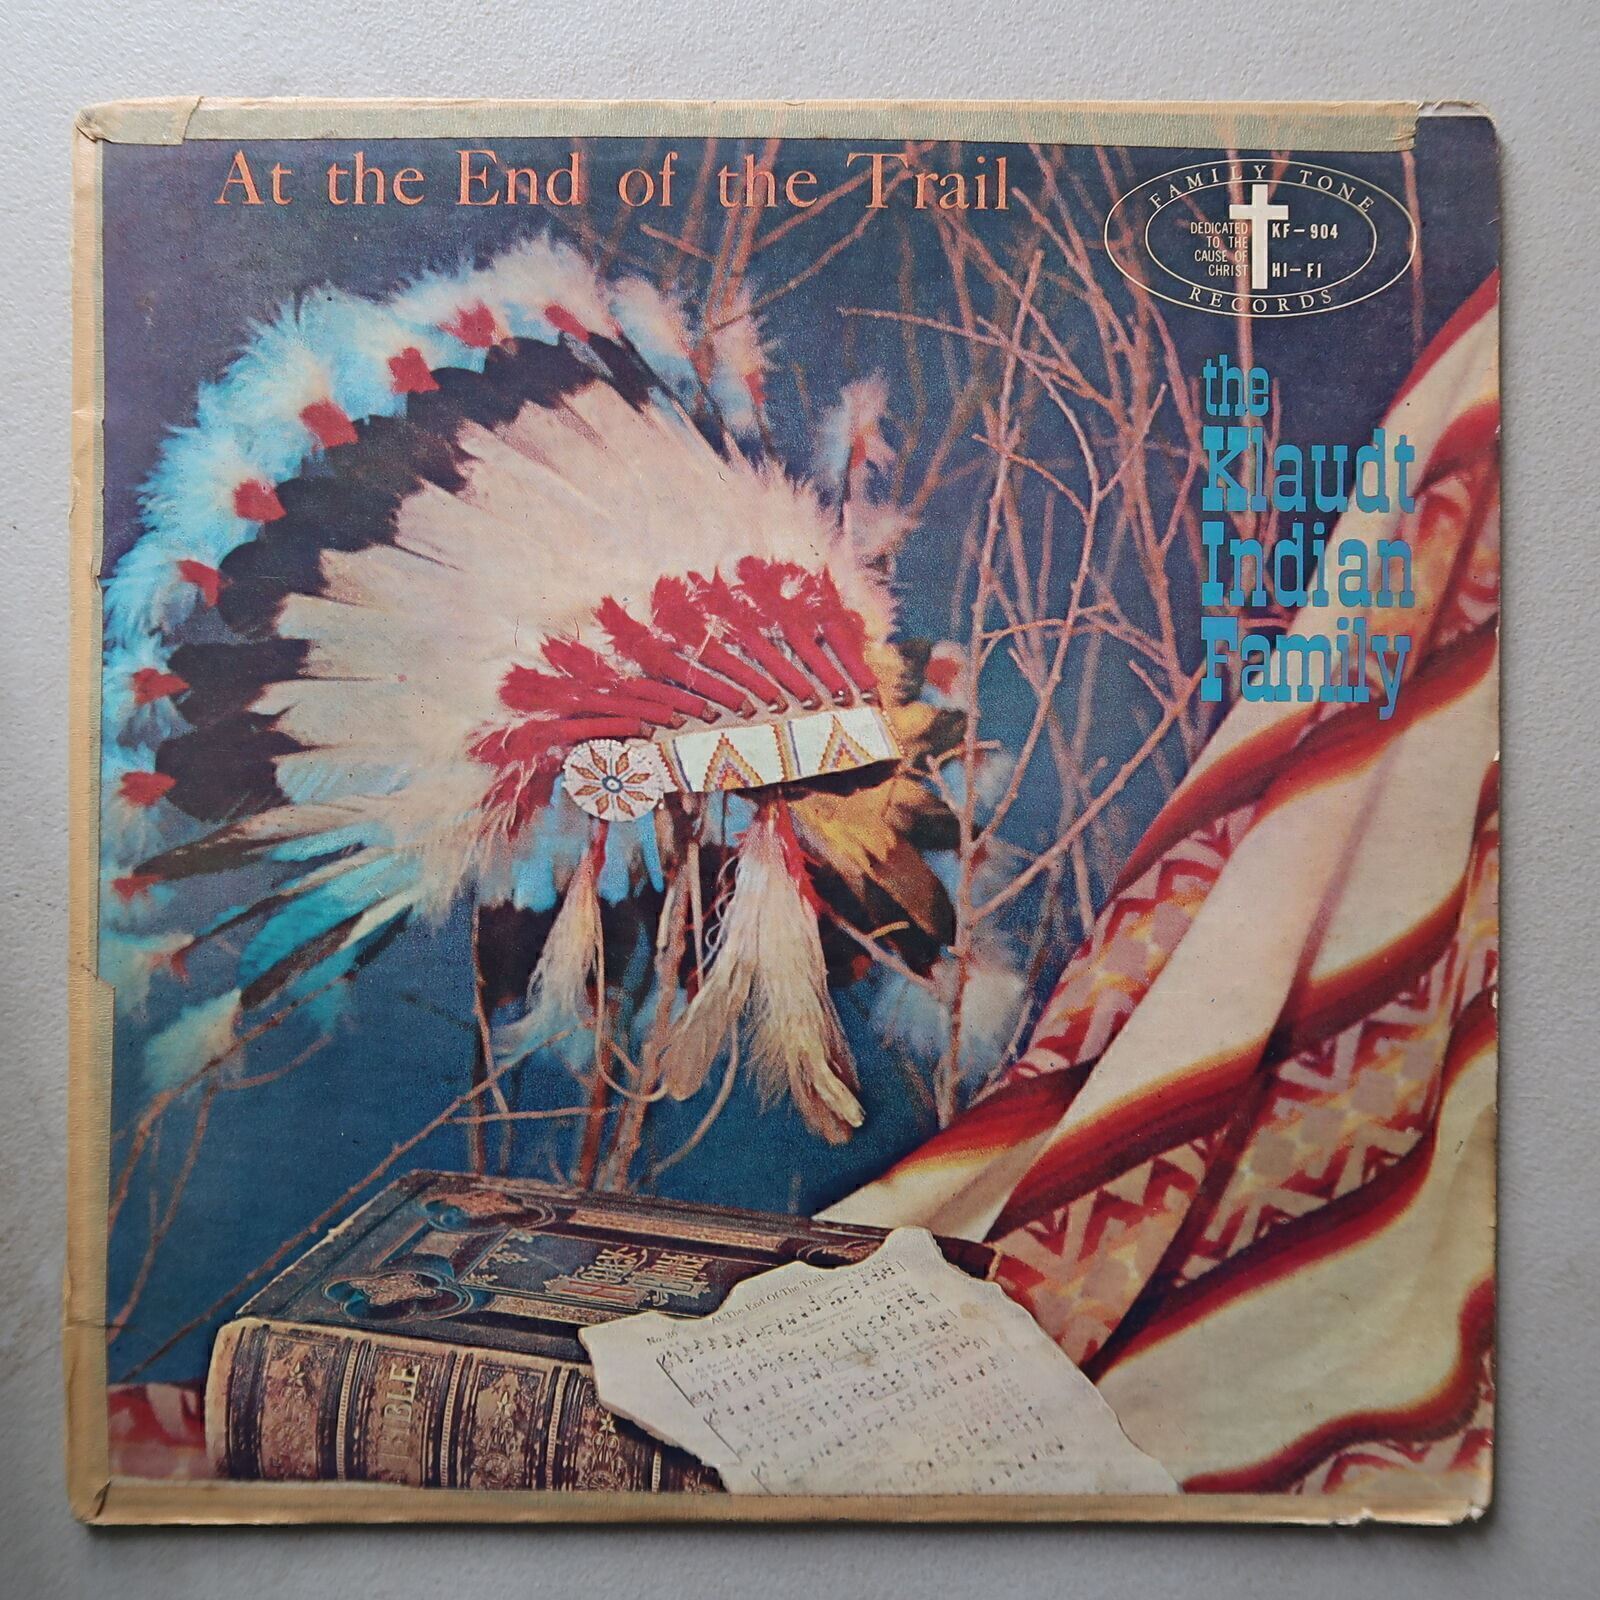 Klaudt Indian Family At the End of the Trail Vinyl LP Family Tone VG 66